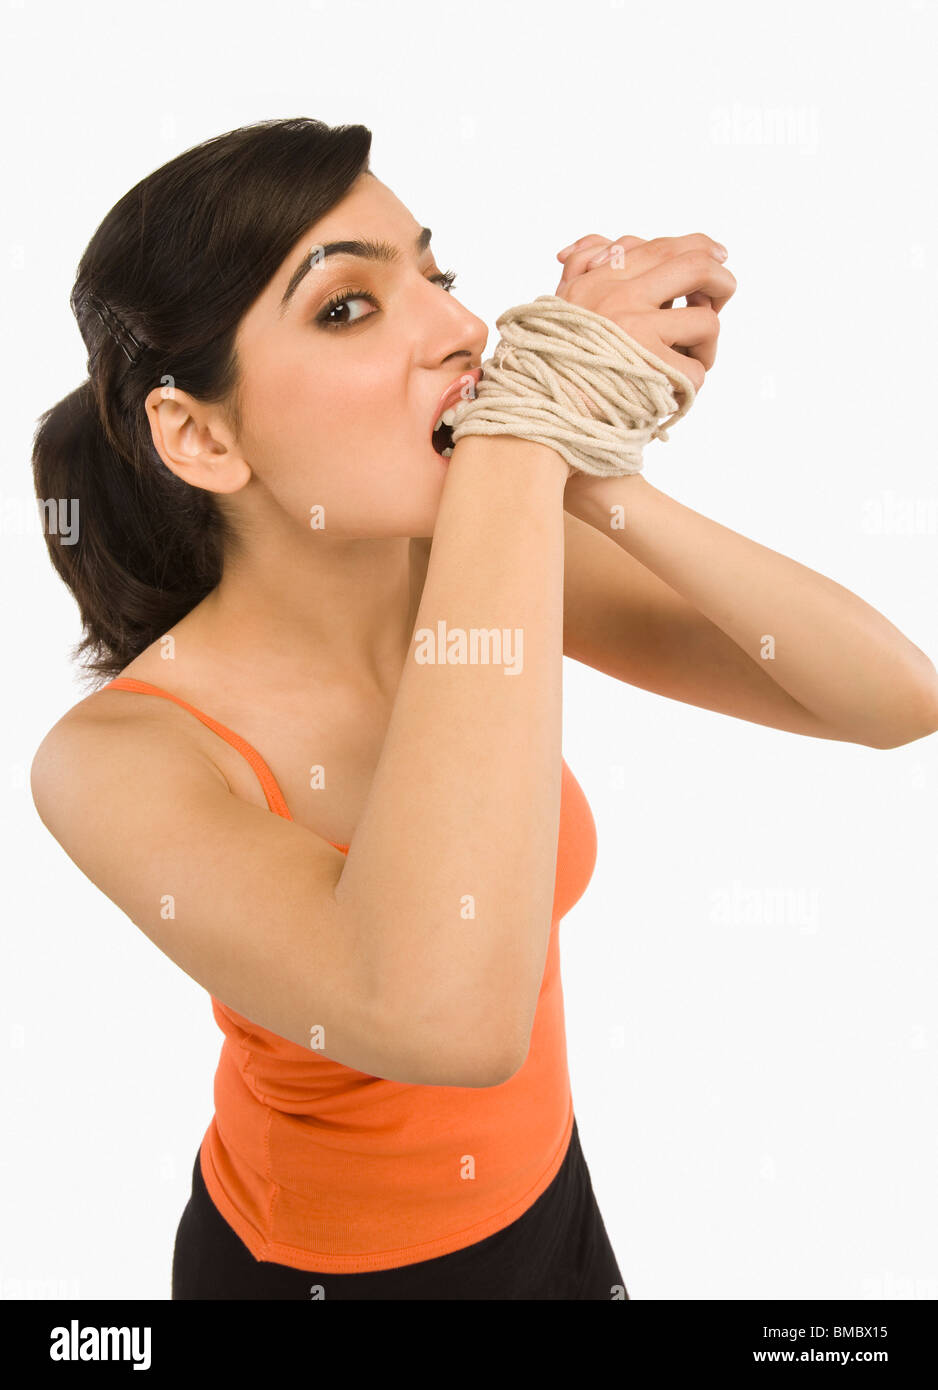 Woman's hands tied with a rope Stock Photo